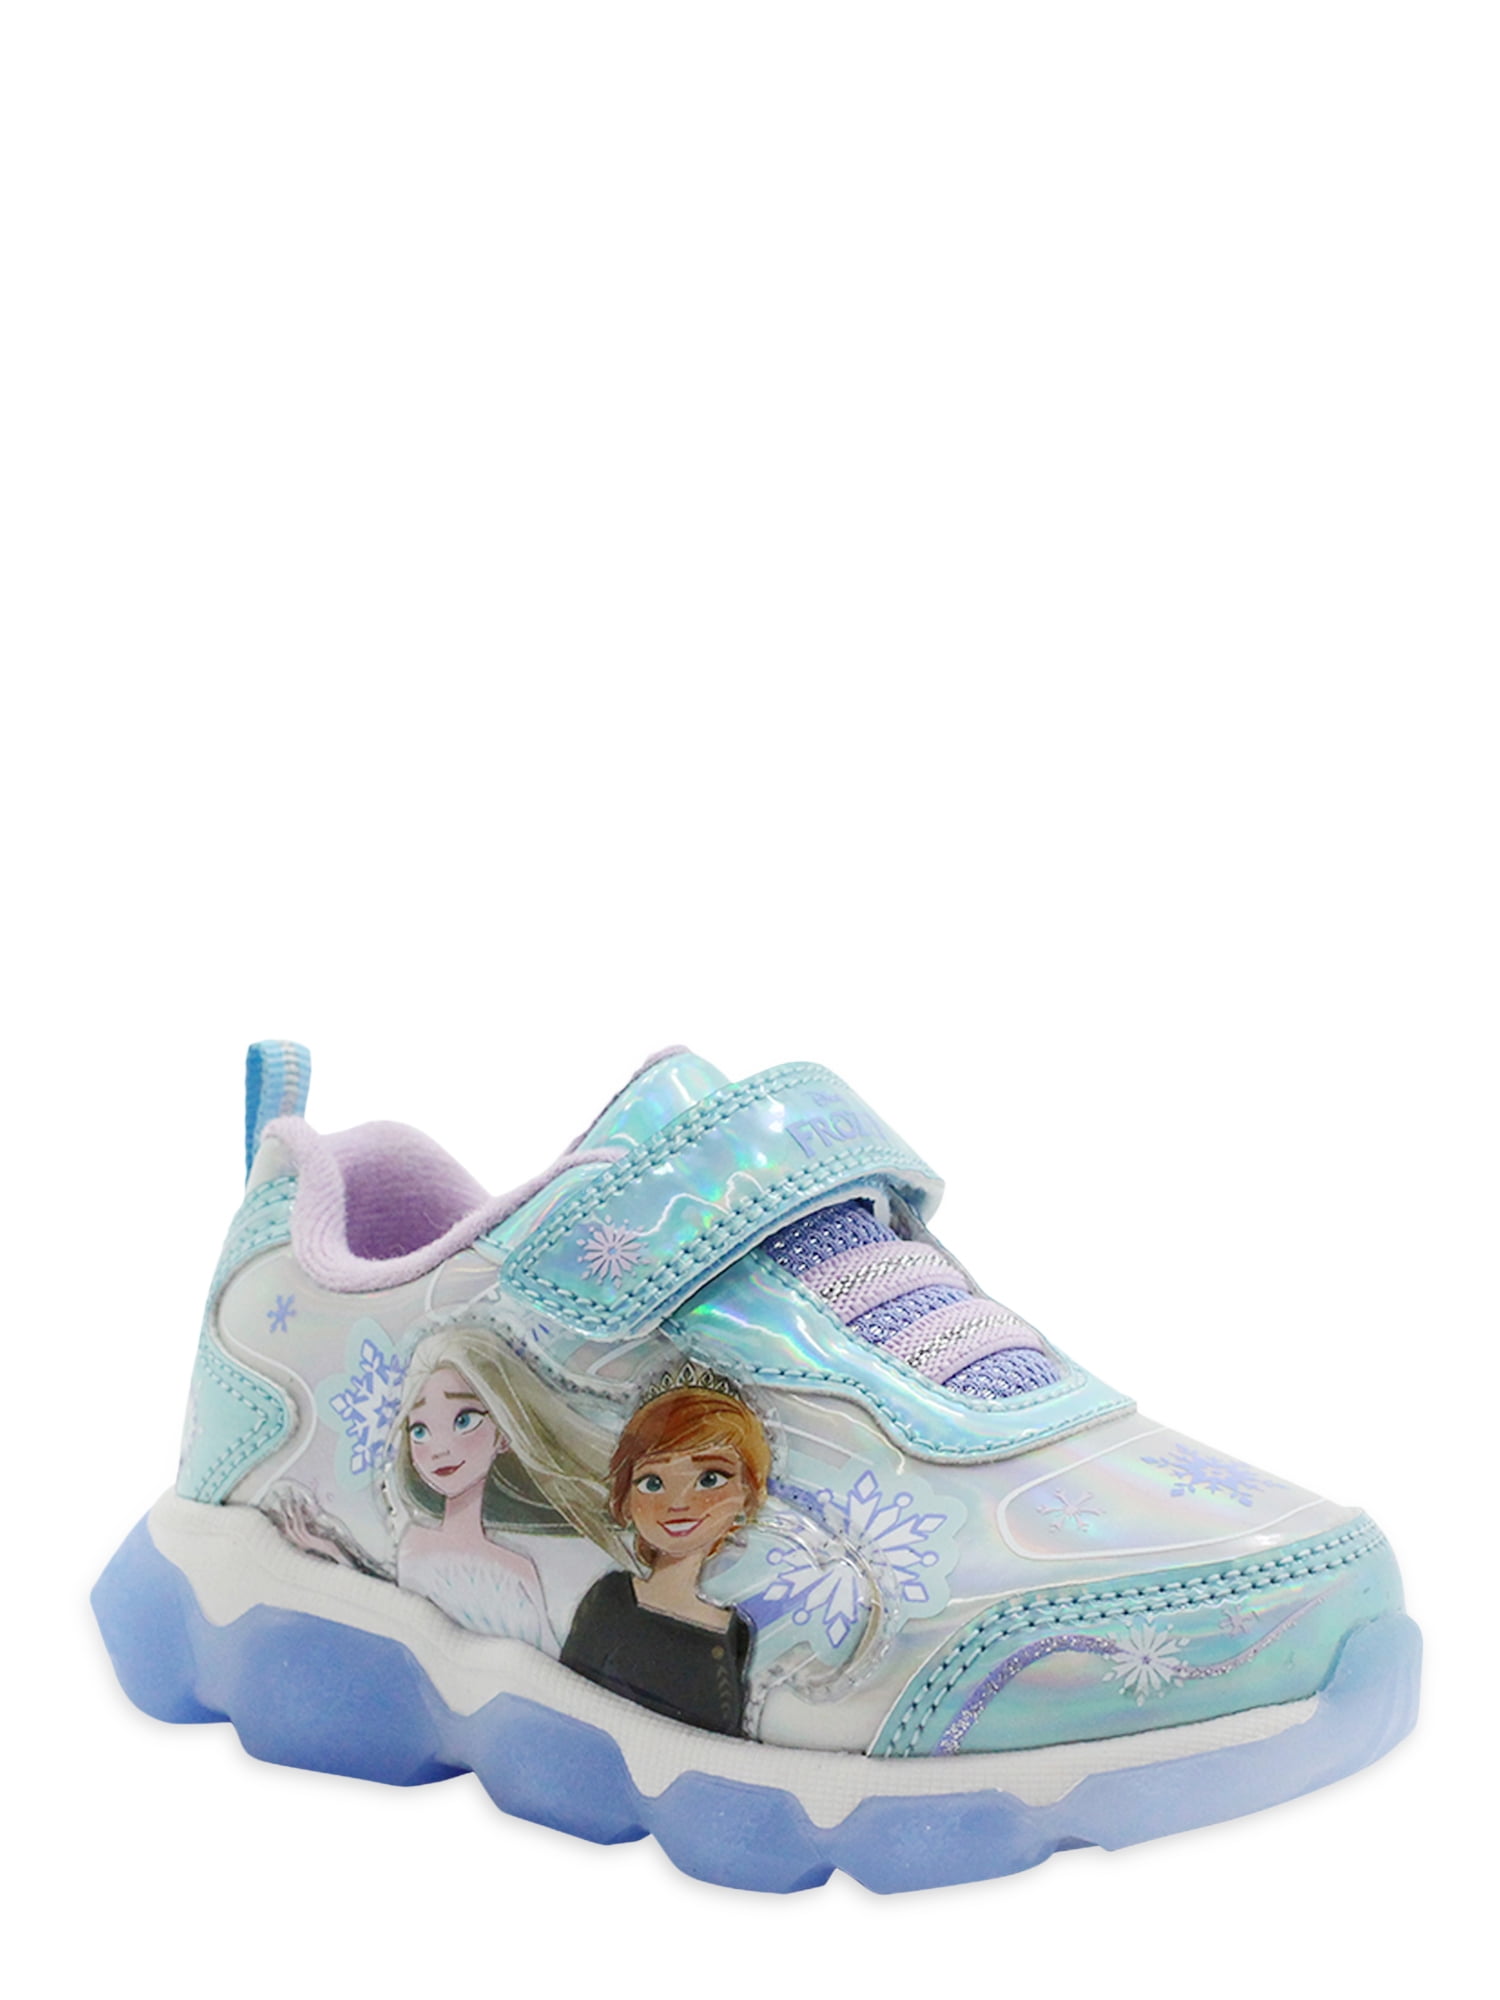 GIRLS DISNEY FROZEN ELSA ANNA CASUAL SHOES CHARACTER TRAINERS KIDS UK SIZE 6-12 